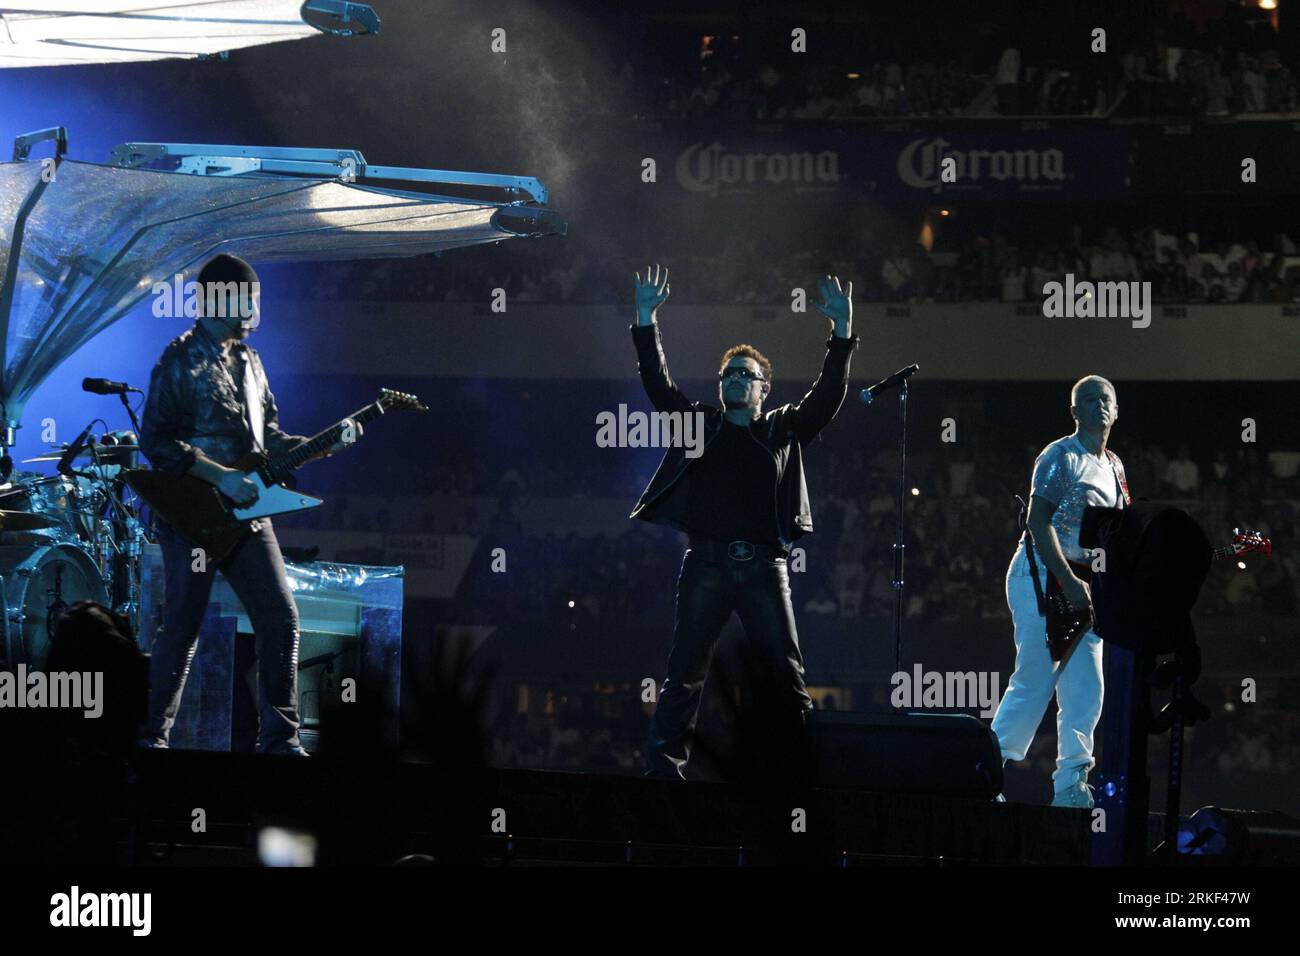 110512 -- MEXICO CITY, May 12, 2011 Xinhua -- Irish Rock band U2 perform during their 360Tour concert held at the Azteca Stadium in Mexico City, Mexico, May 11, 2011. Xinhua/Adhir Ramirez yc CORRECTION-MEXICO-MEXICO CITY-CONCERT-U2 PUBLICATIONxNOTxINxCHN Stock Photo